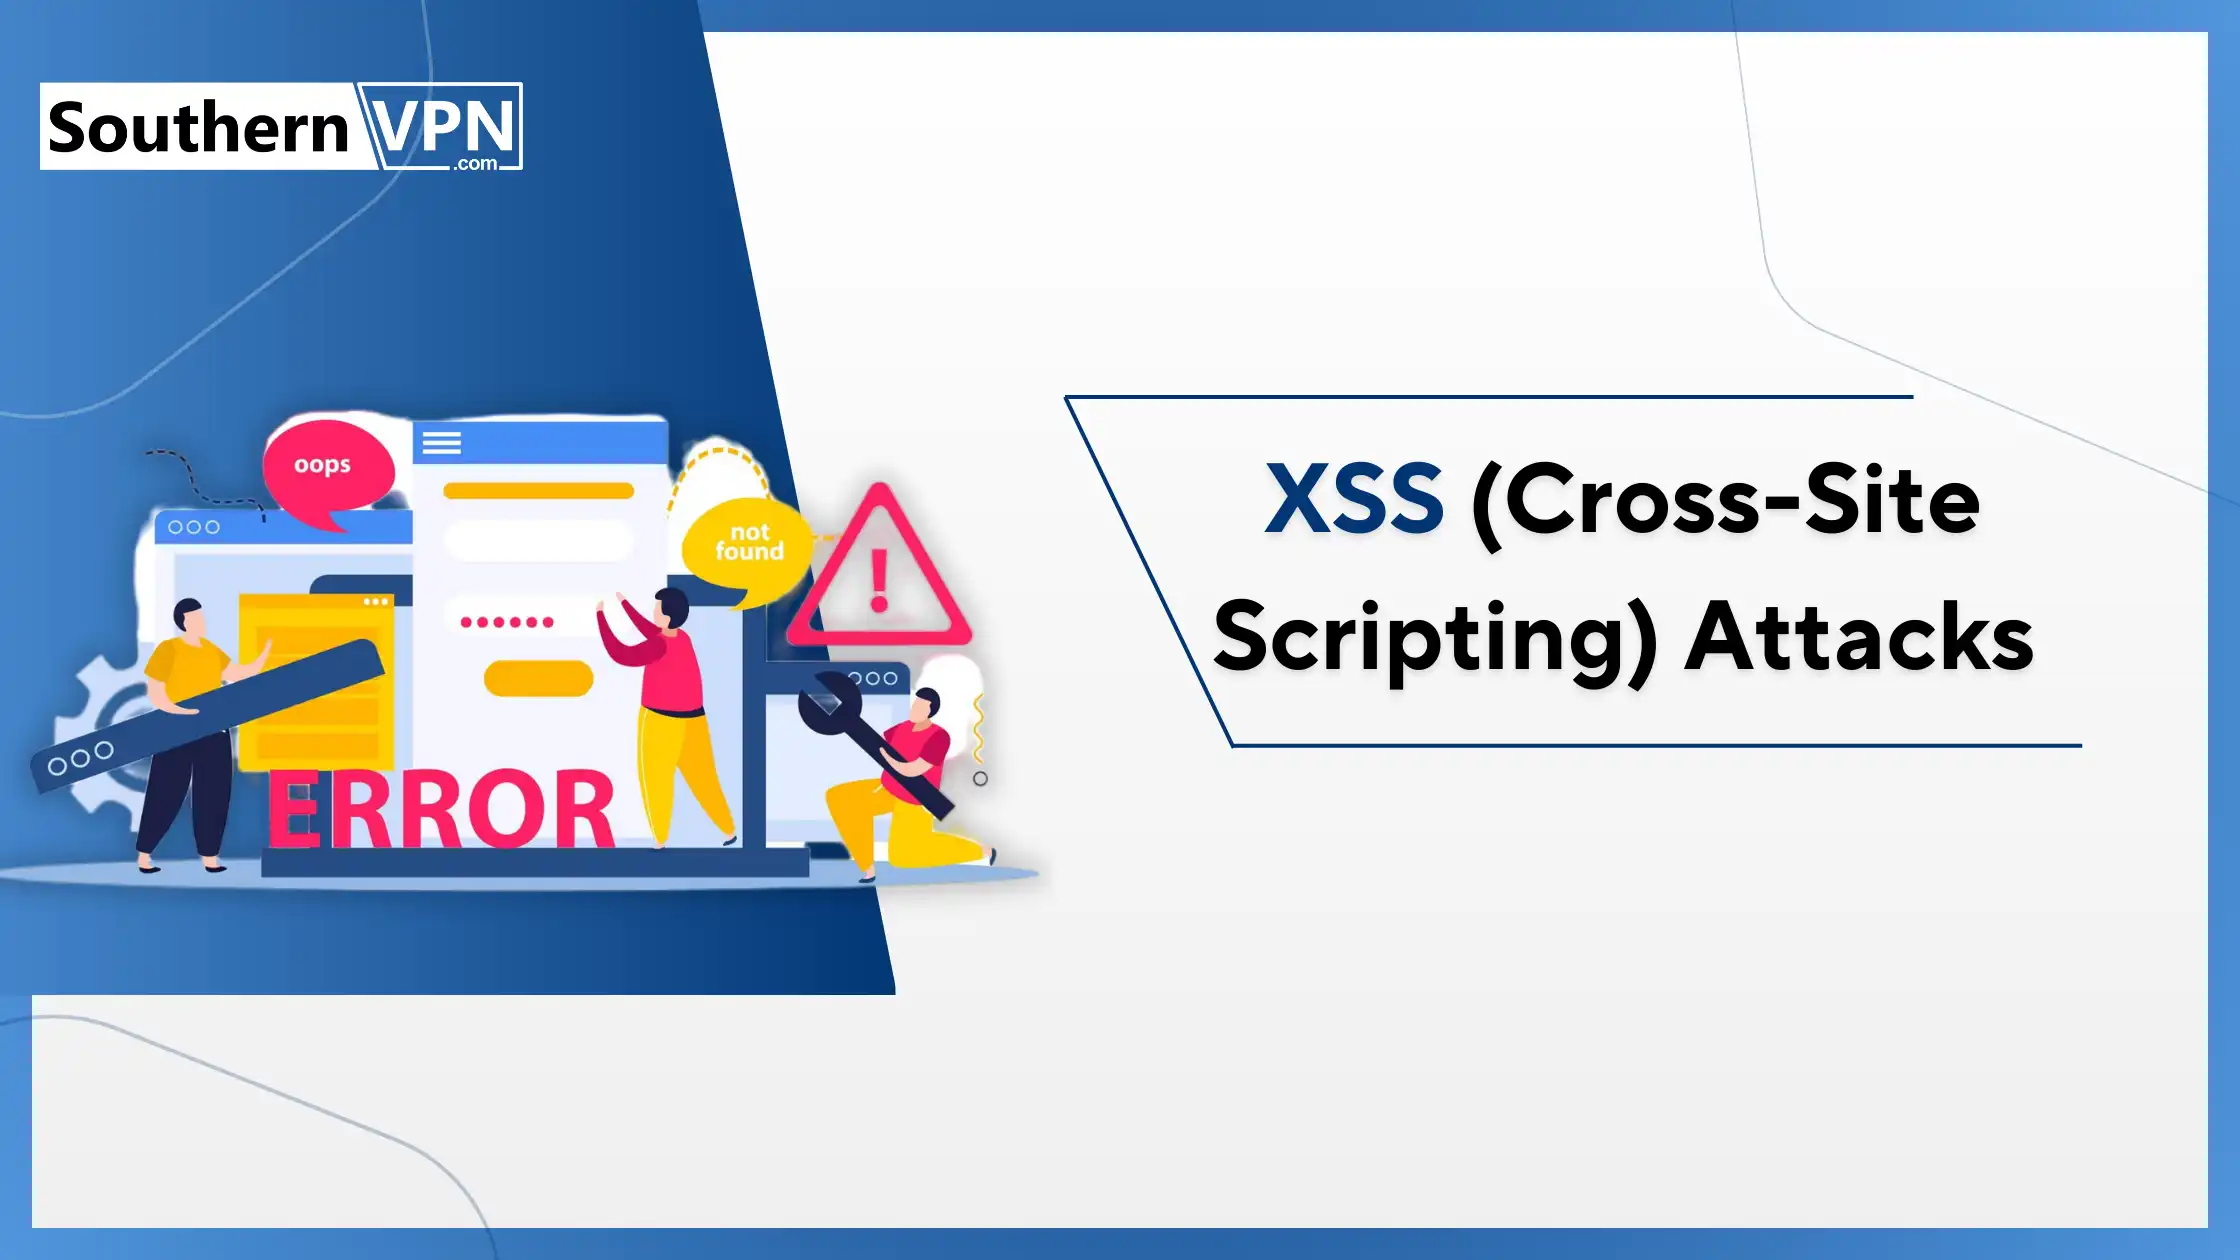 Illustration depicting XSS (Cross-Site Scripting) attacks with error messages and warning signs, highlighting types of cyber attacks.